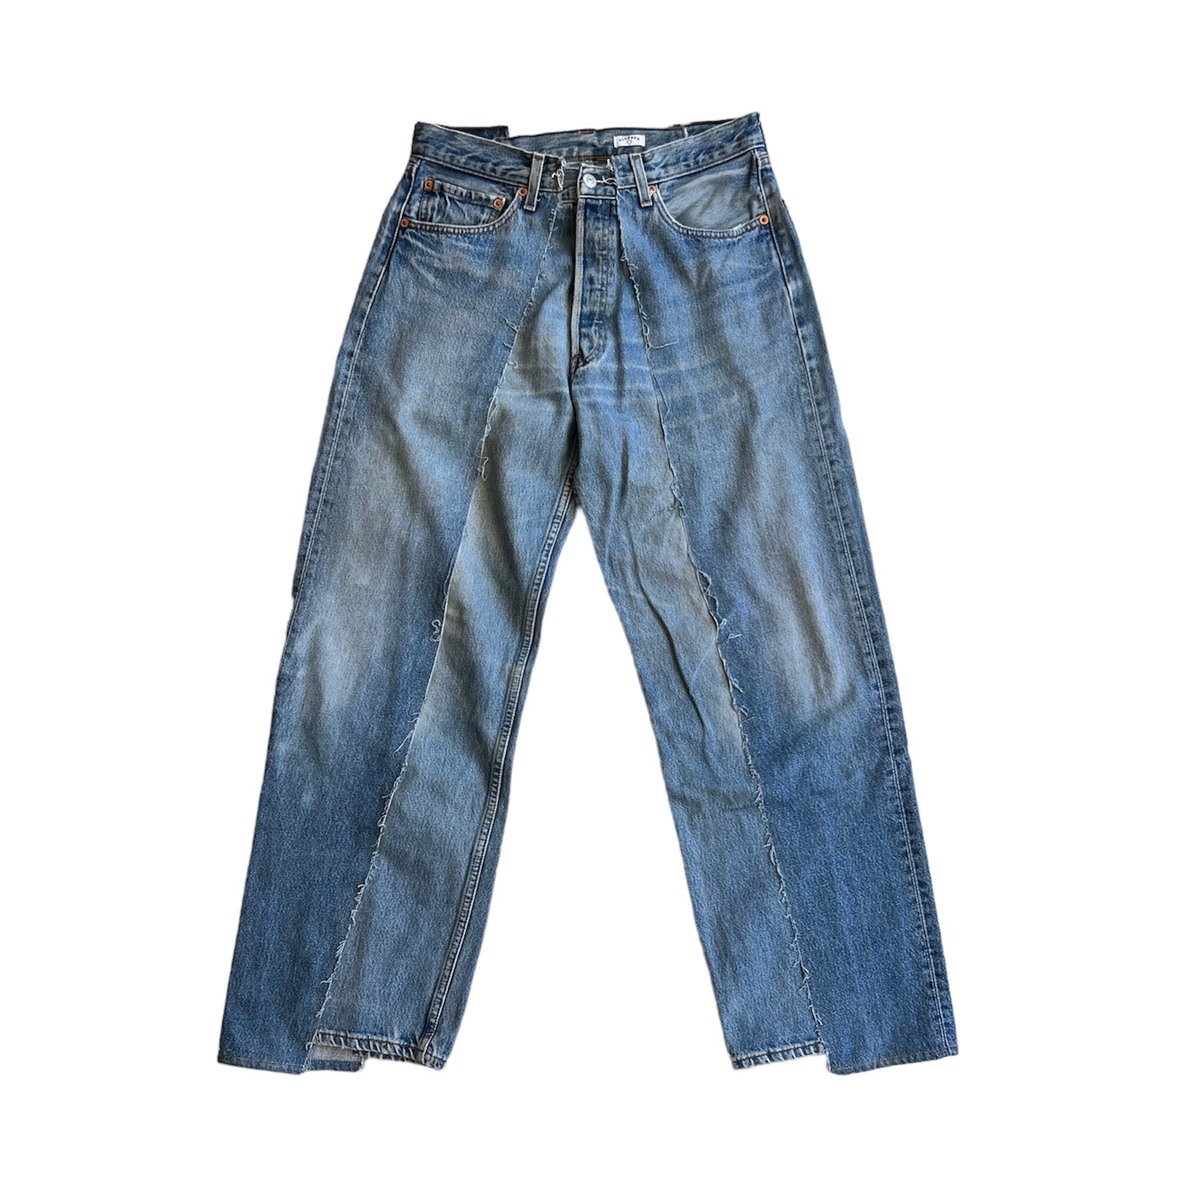 OLDPARK baggy jeans blue-M - 画像1枚目